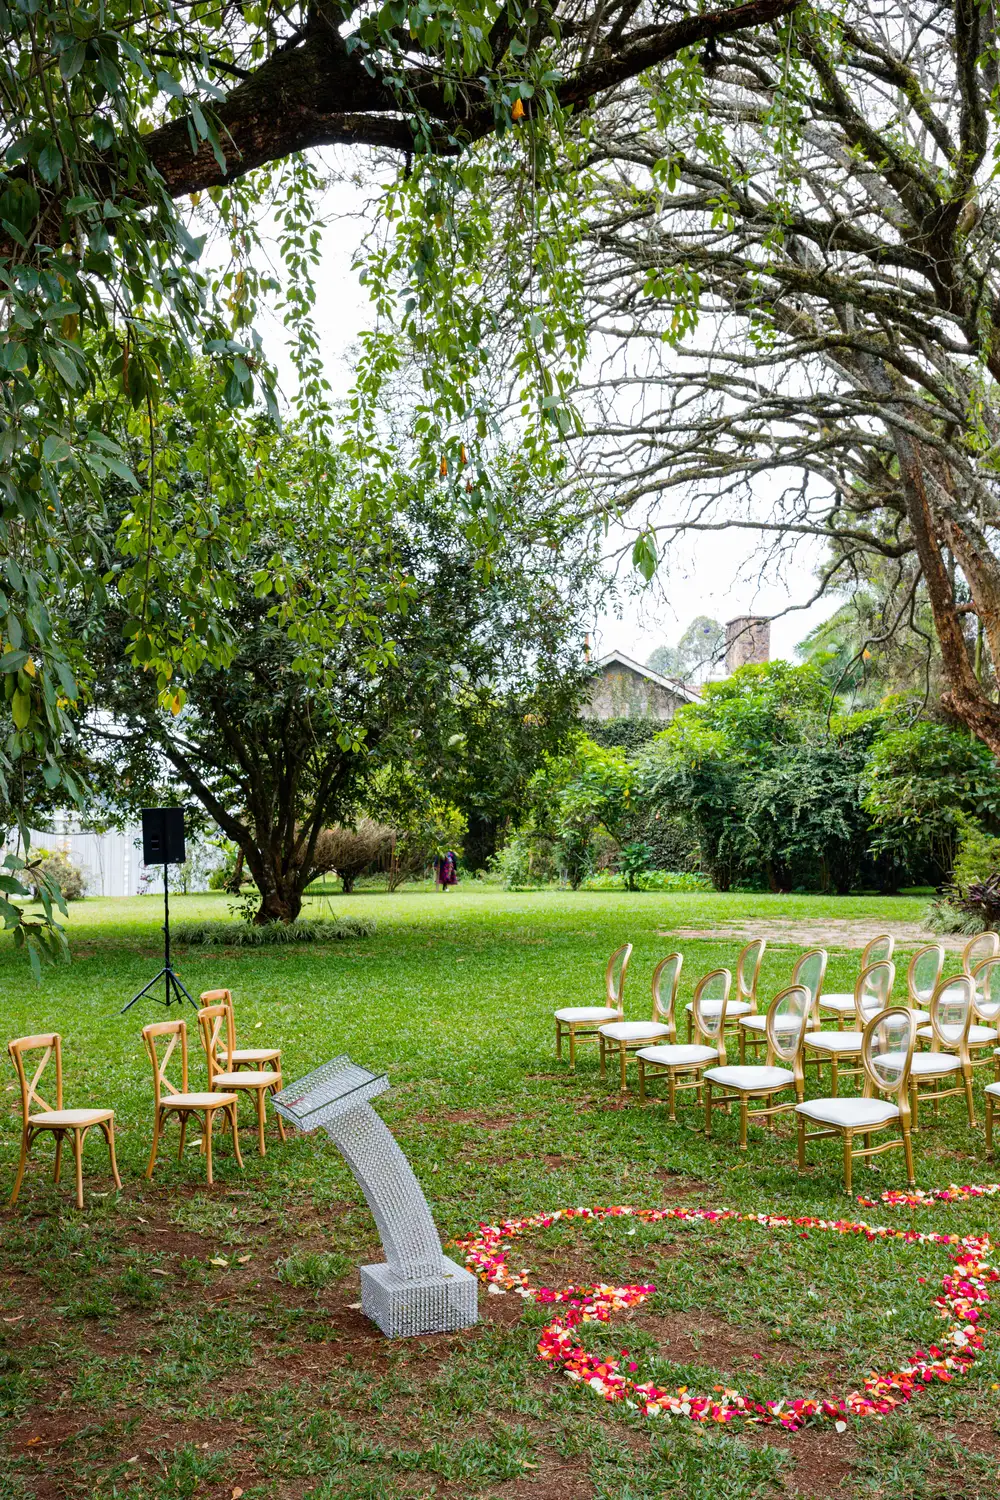 Chairs arranged Outdoors for a  Wedding Ceremony